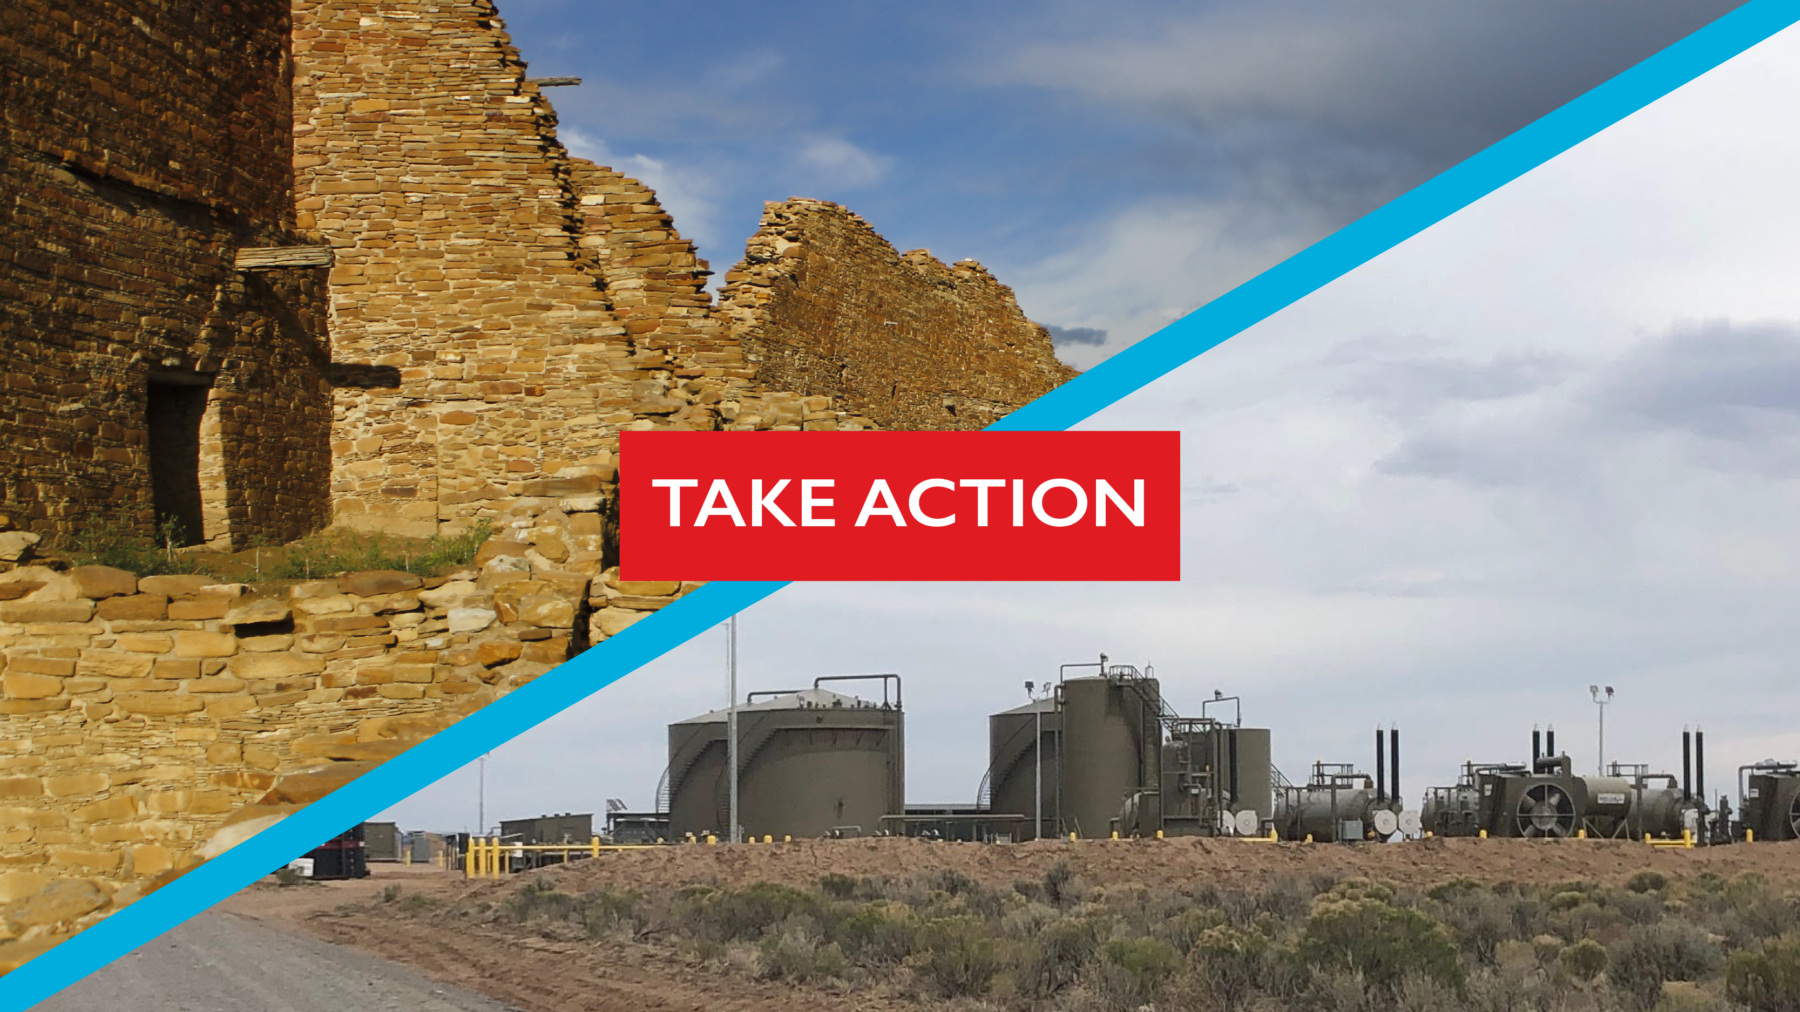 Take Action to Defend Chaco from Oil and Gas Development